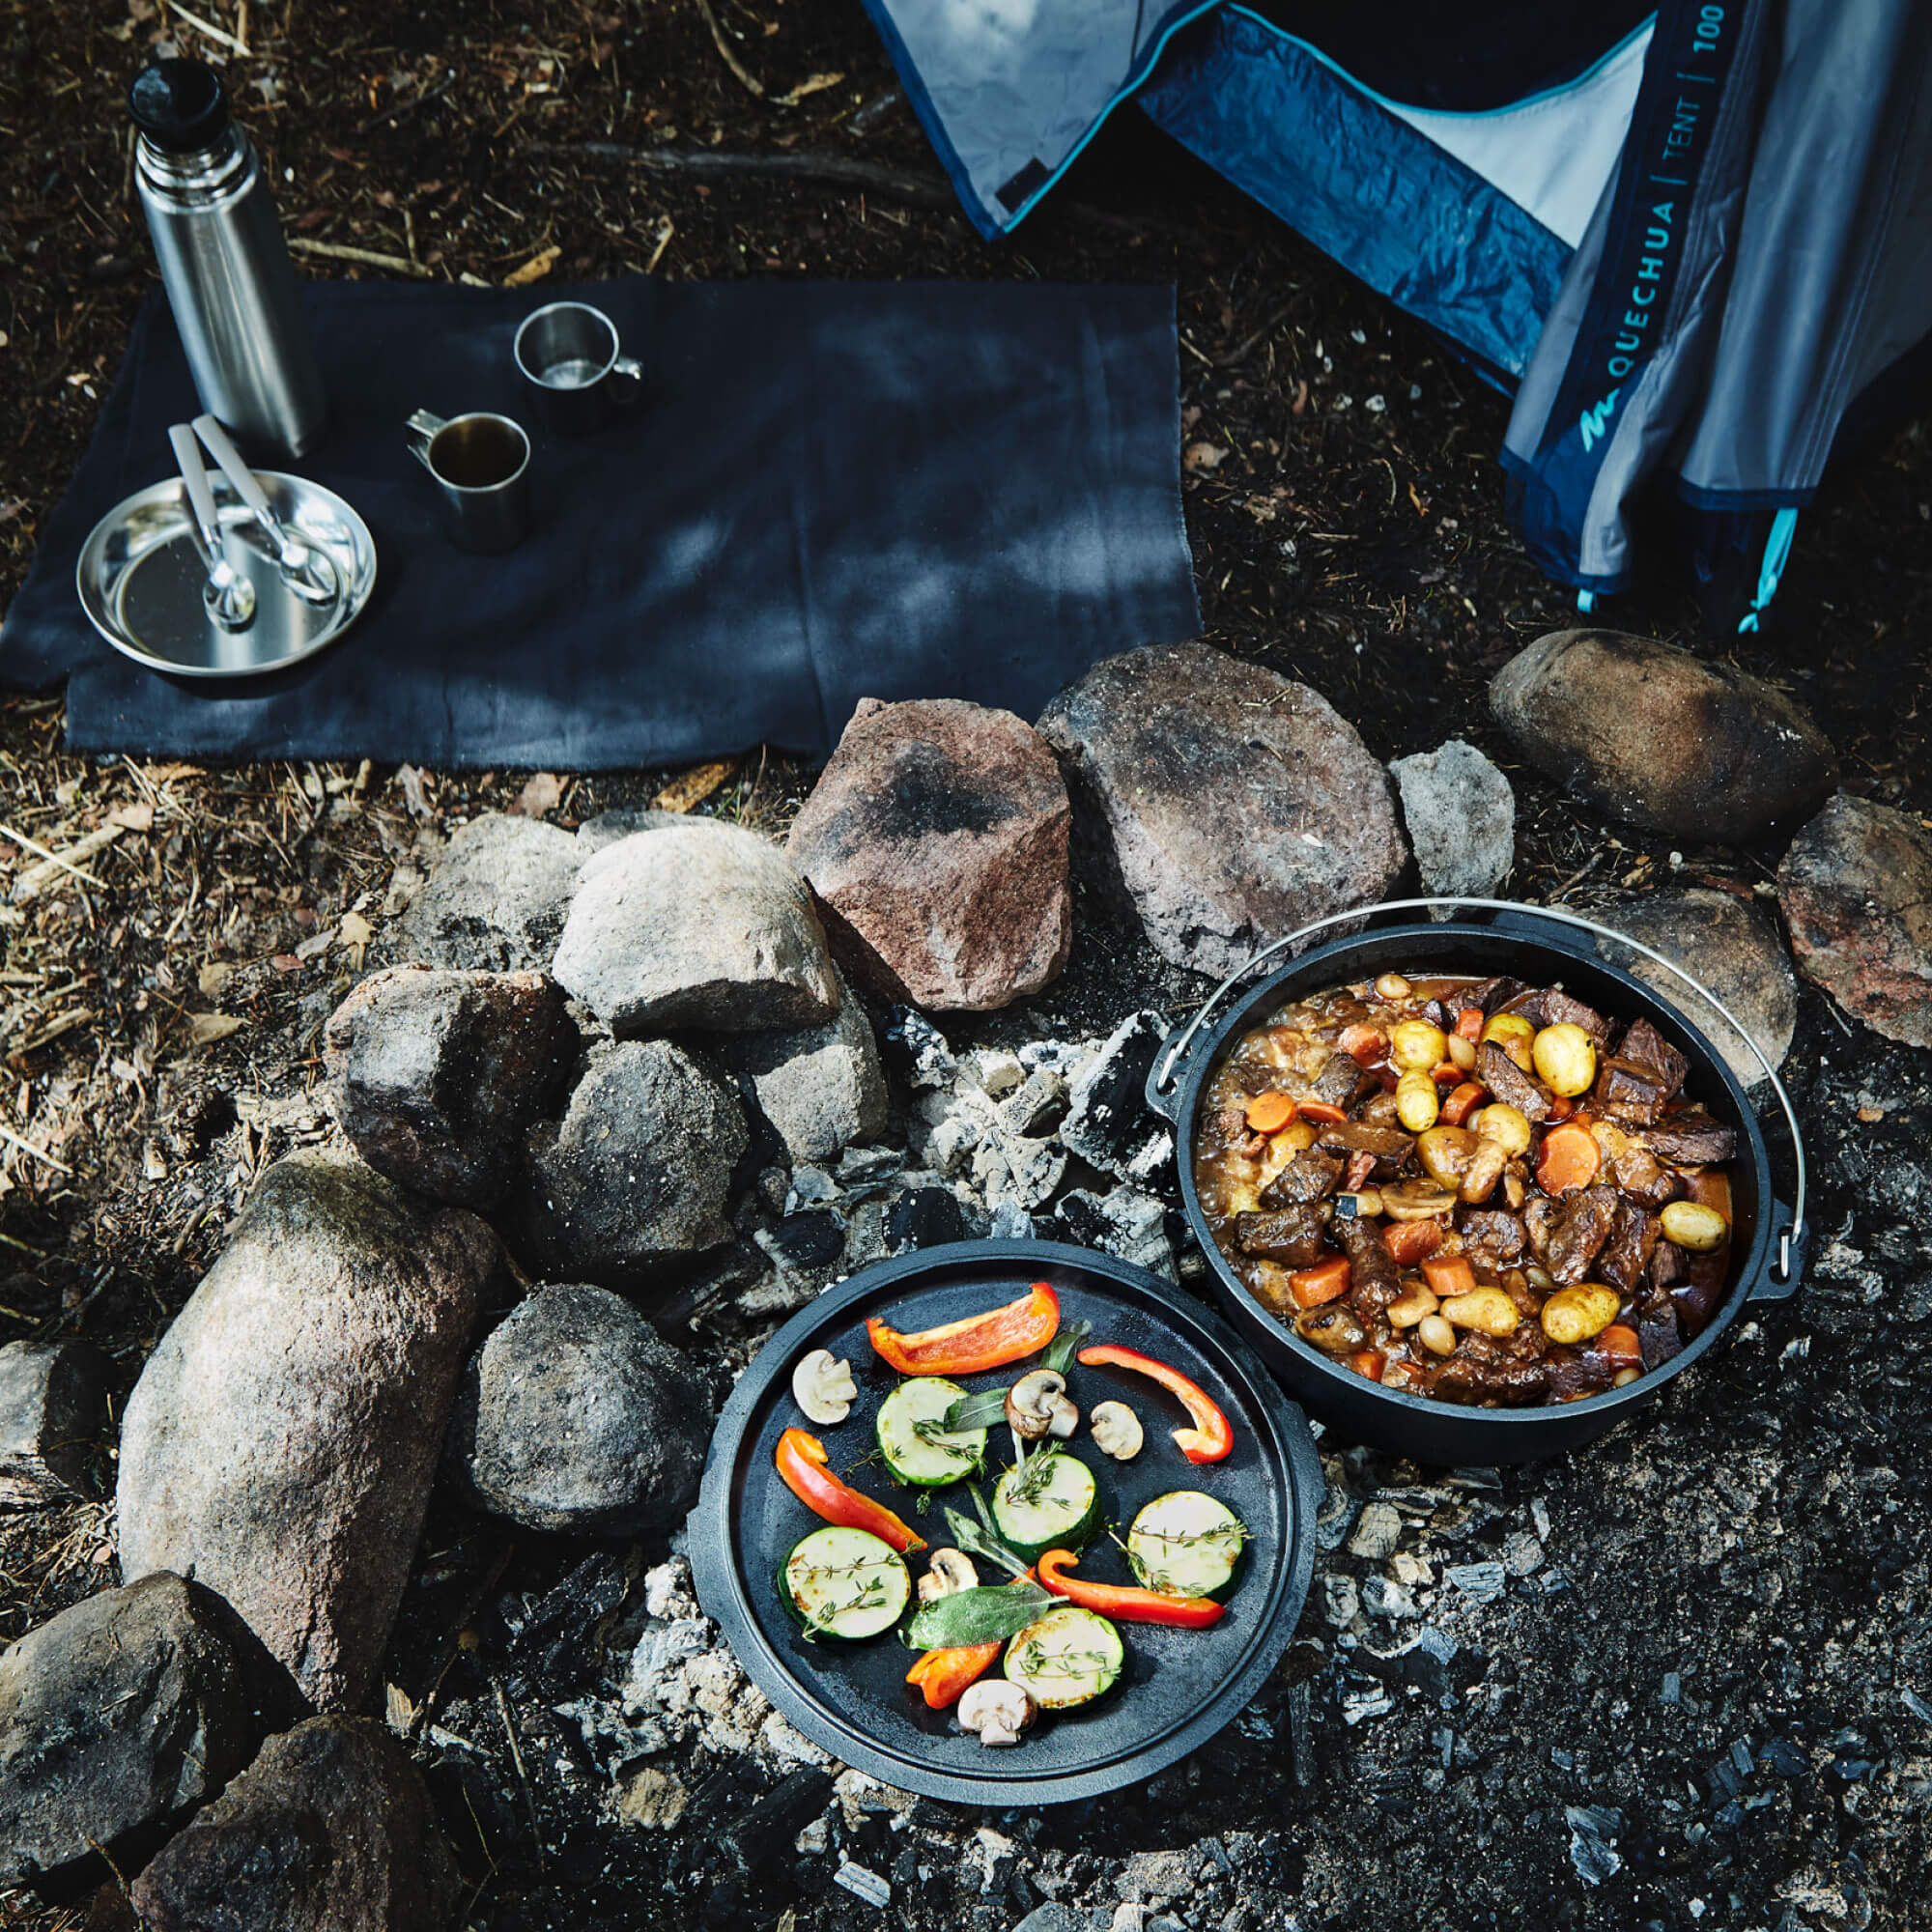 Uno Casa 2in1 Dutch Oven Large - 5 Quart Dutch Oven Pot with Lid, Seasoned  Cast Iron Camping Stove for Bread, Heavy Duty Cast Iron Pot with Frying Pan